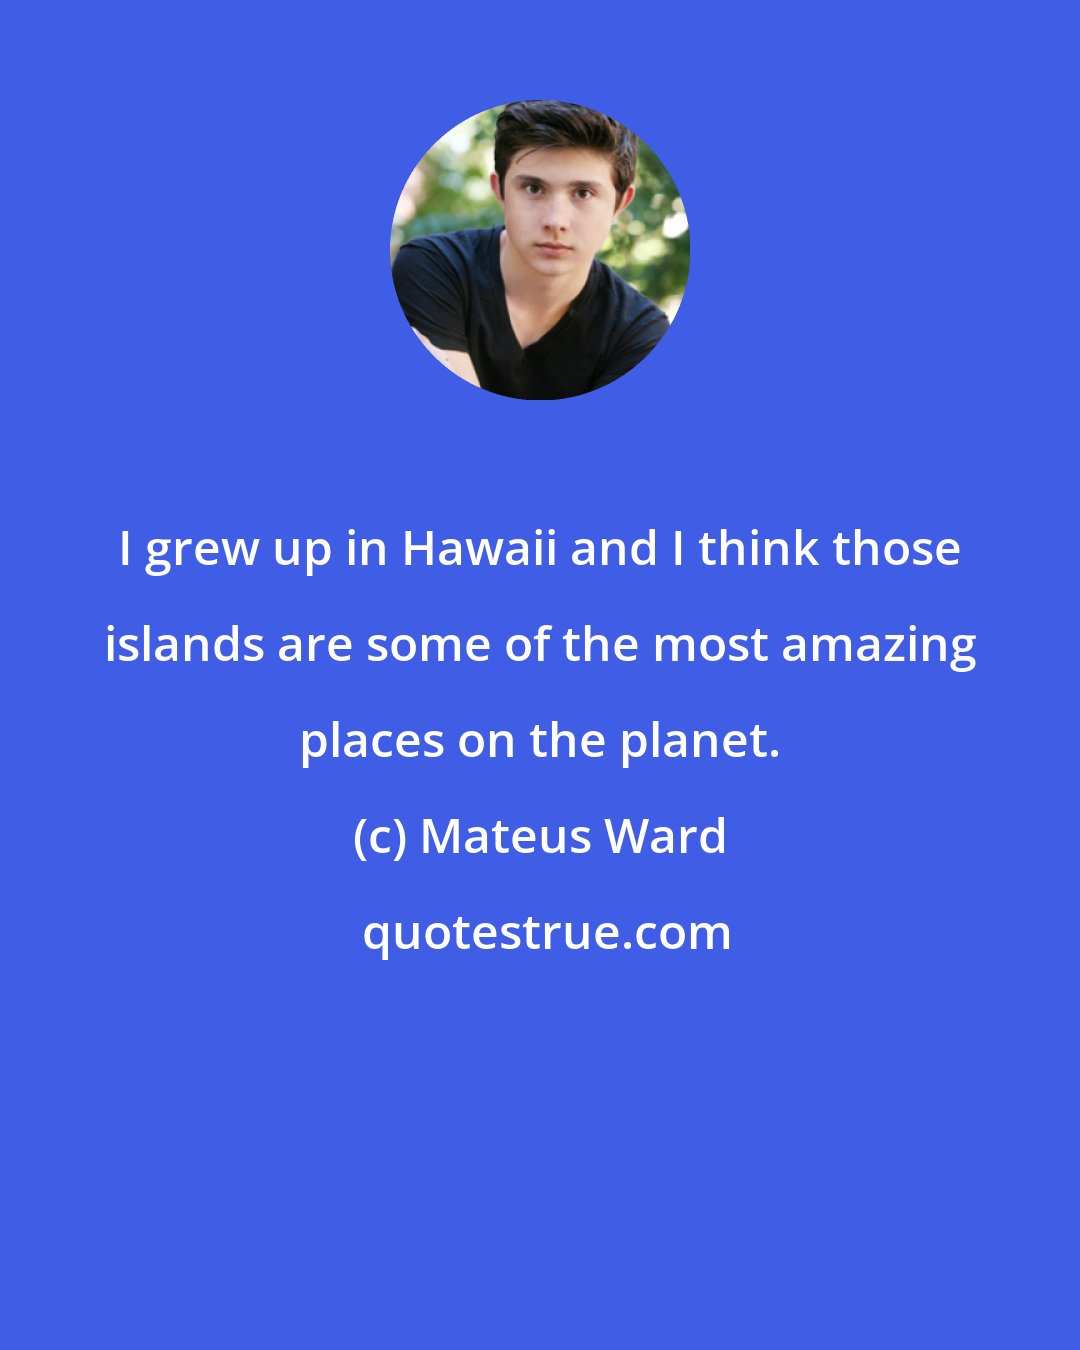 Mateus Ward: I grew up in Hawaii and I think those islands are some of the most amazing places on the planet.